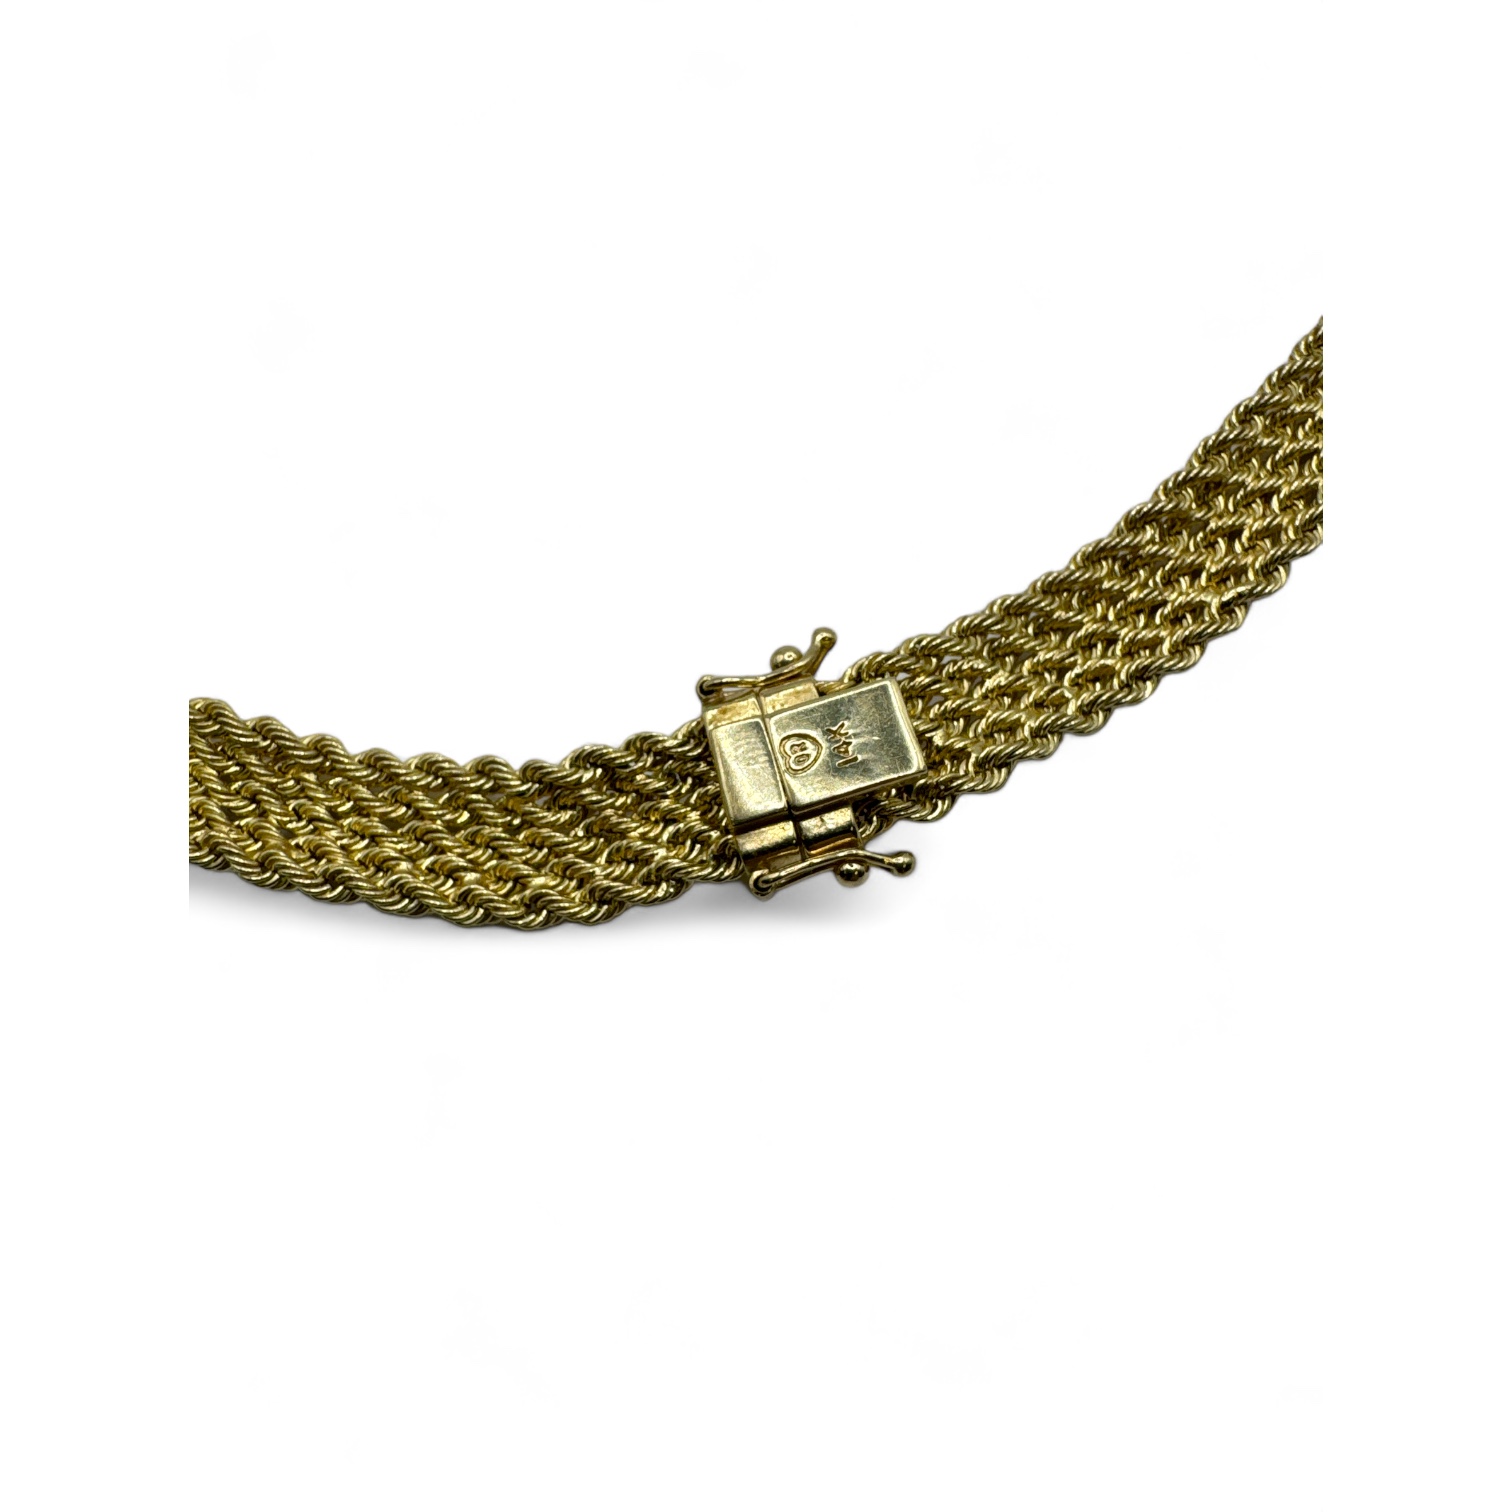 A 14K mesh collar necklace. In yellow precious metal which tests as 14K yellow gold. With box - Image 2 of 2